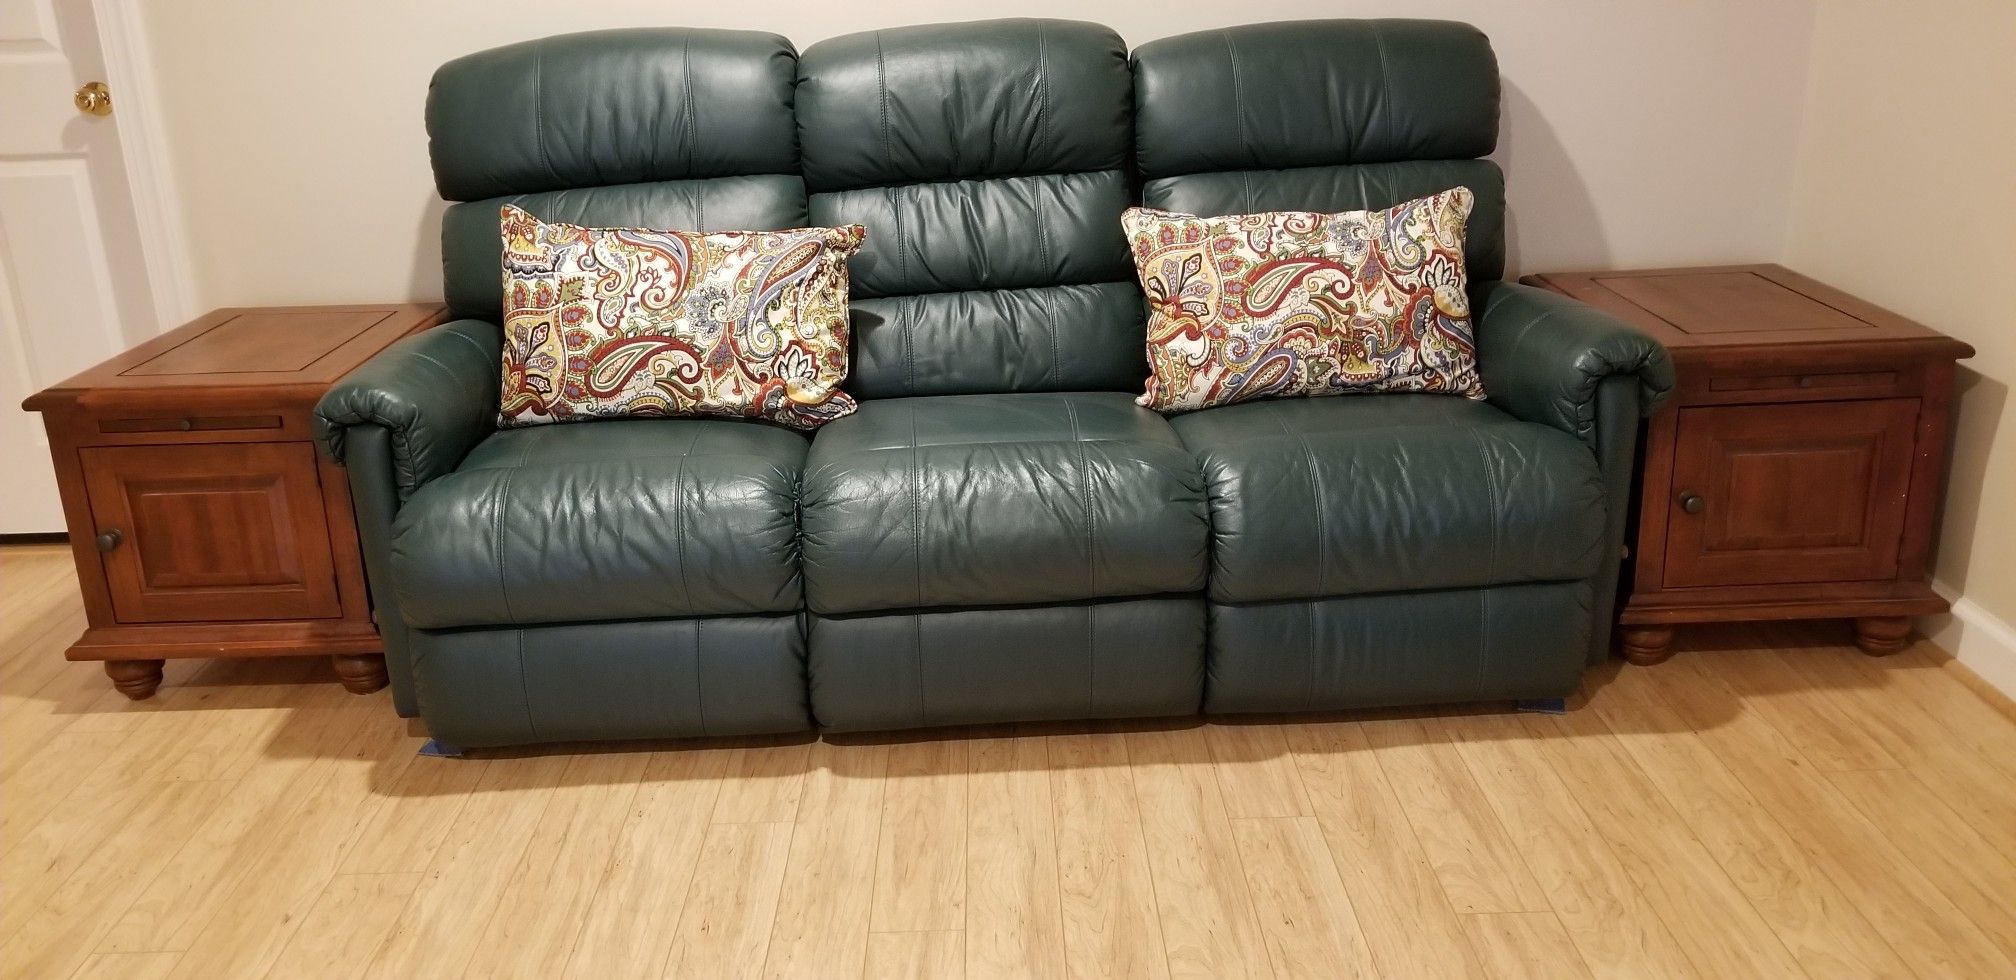 LaZboy leather double recliner sofa. No wear and tear. Excellent condition. $275 you haul